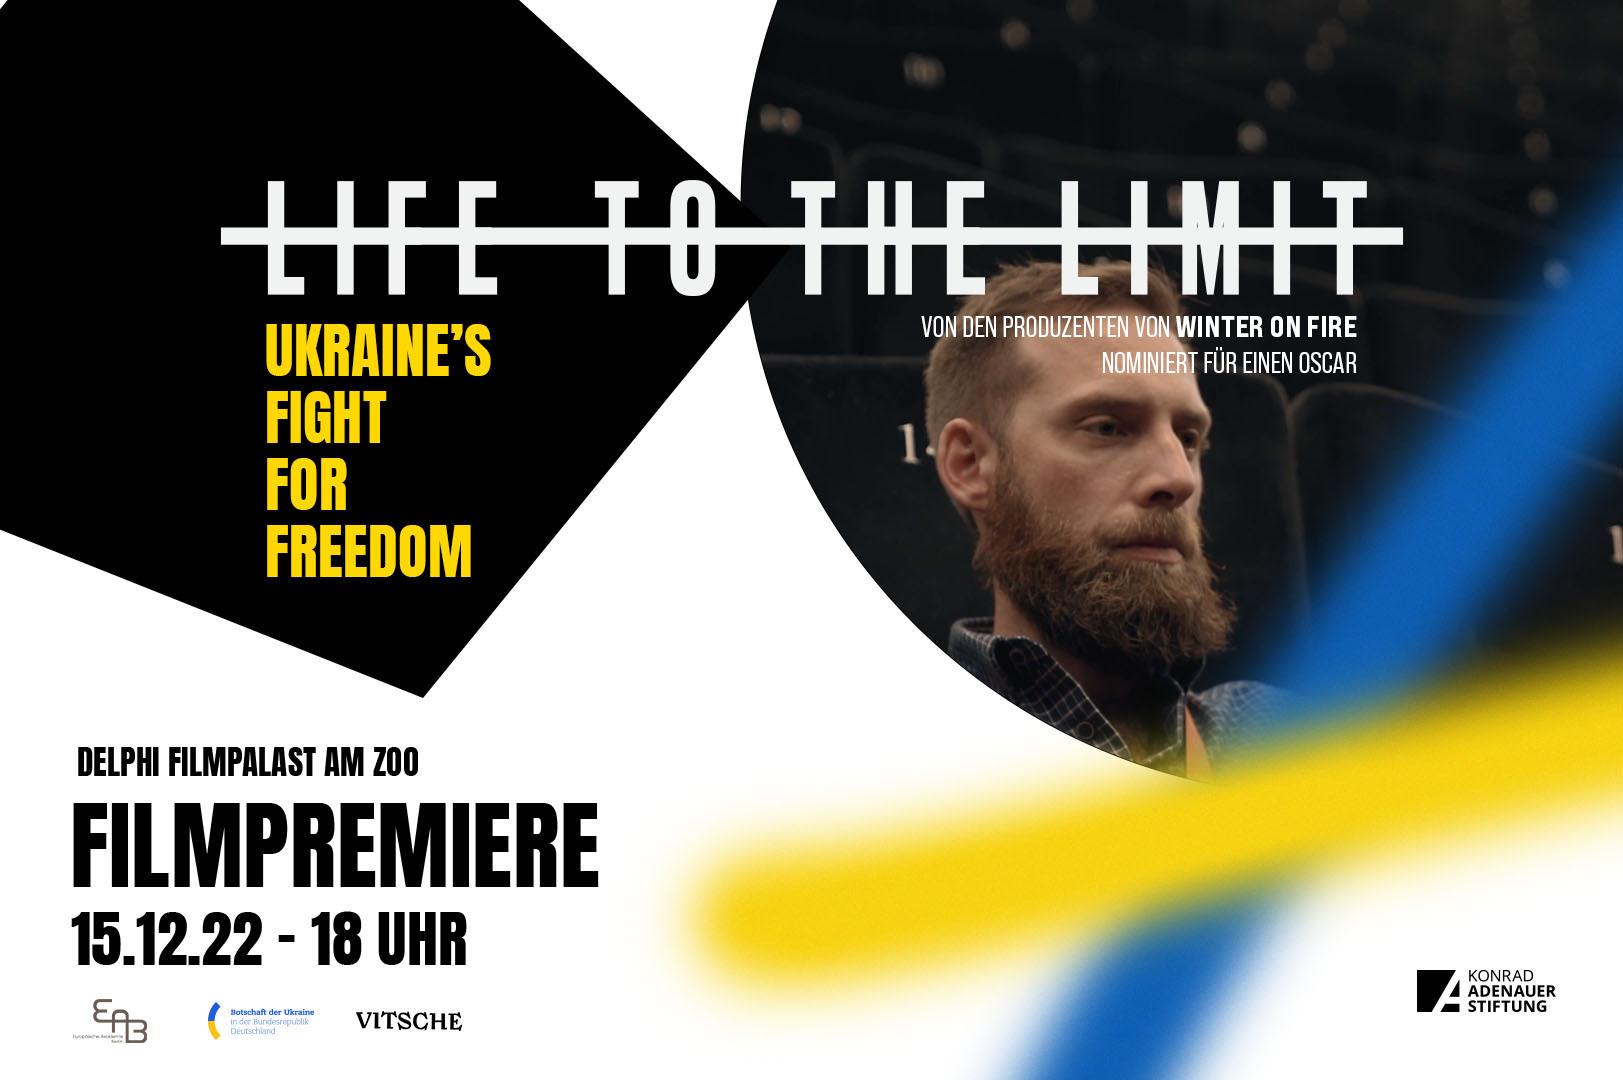 Life to the Limit -  Filmpremiere am 15.12.2022